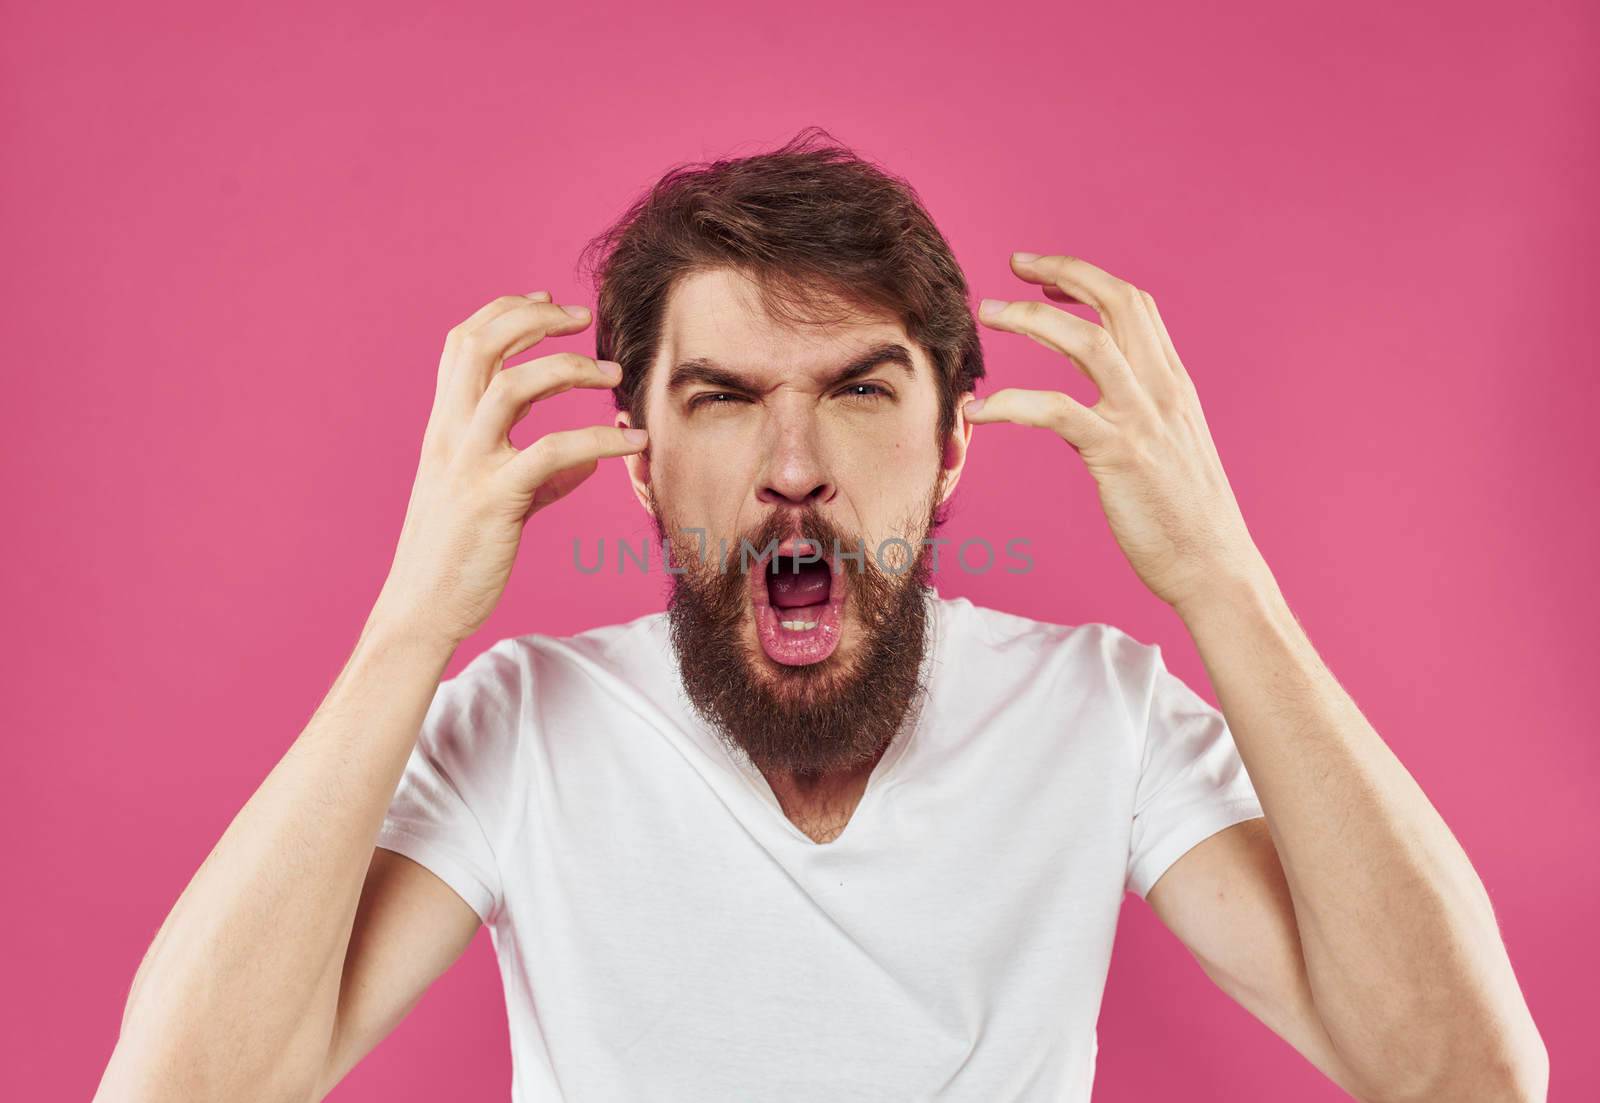 Angry man yells on pink background stress irritability model by SHOTPRIME